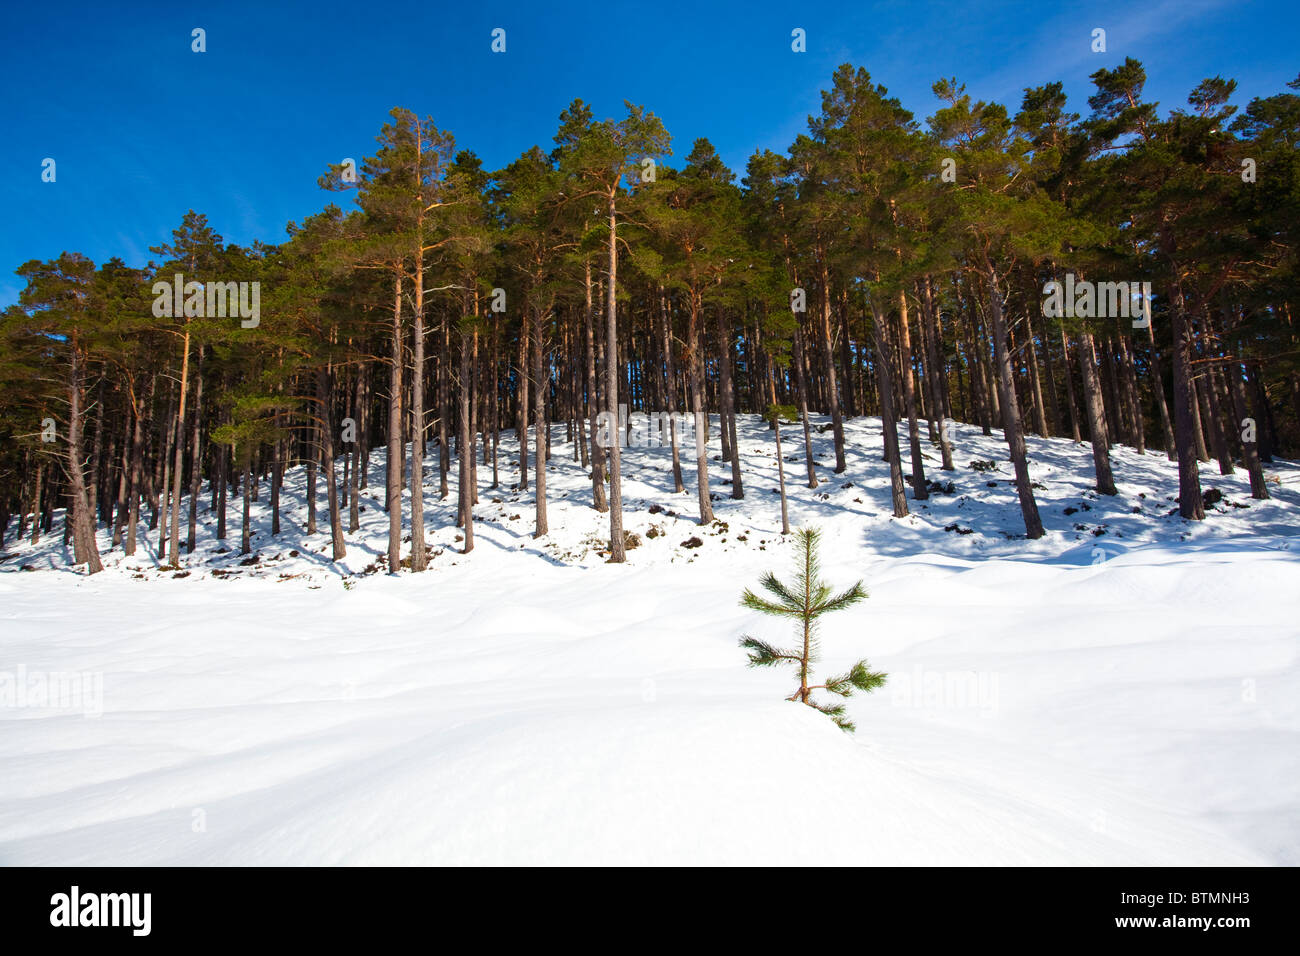 Scotland, Scottish Highlands, Cairngorms National Park. Snow covered Fir trees and Scots Pines in the Rothiemurchus Estate Stock Photo